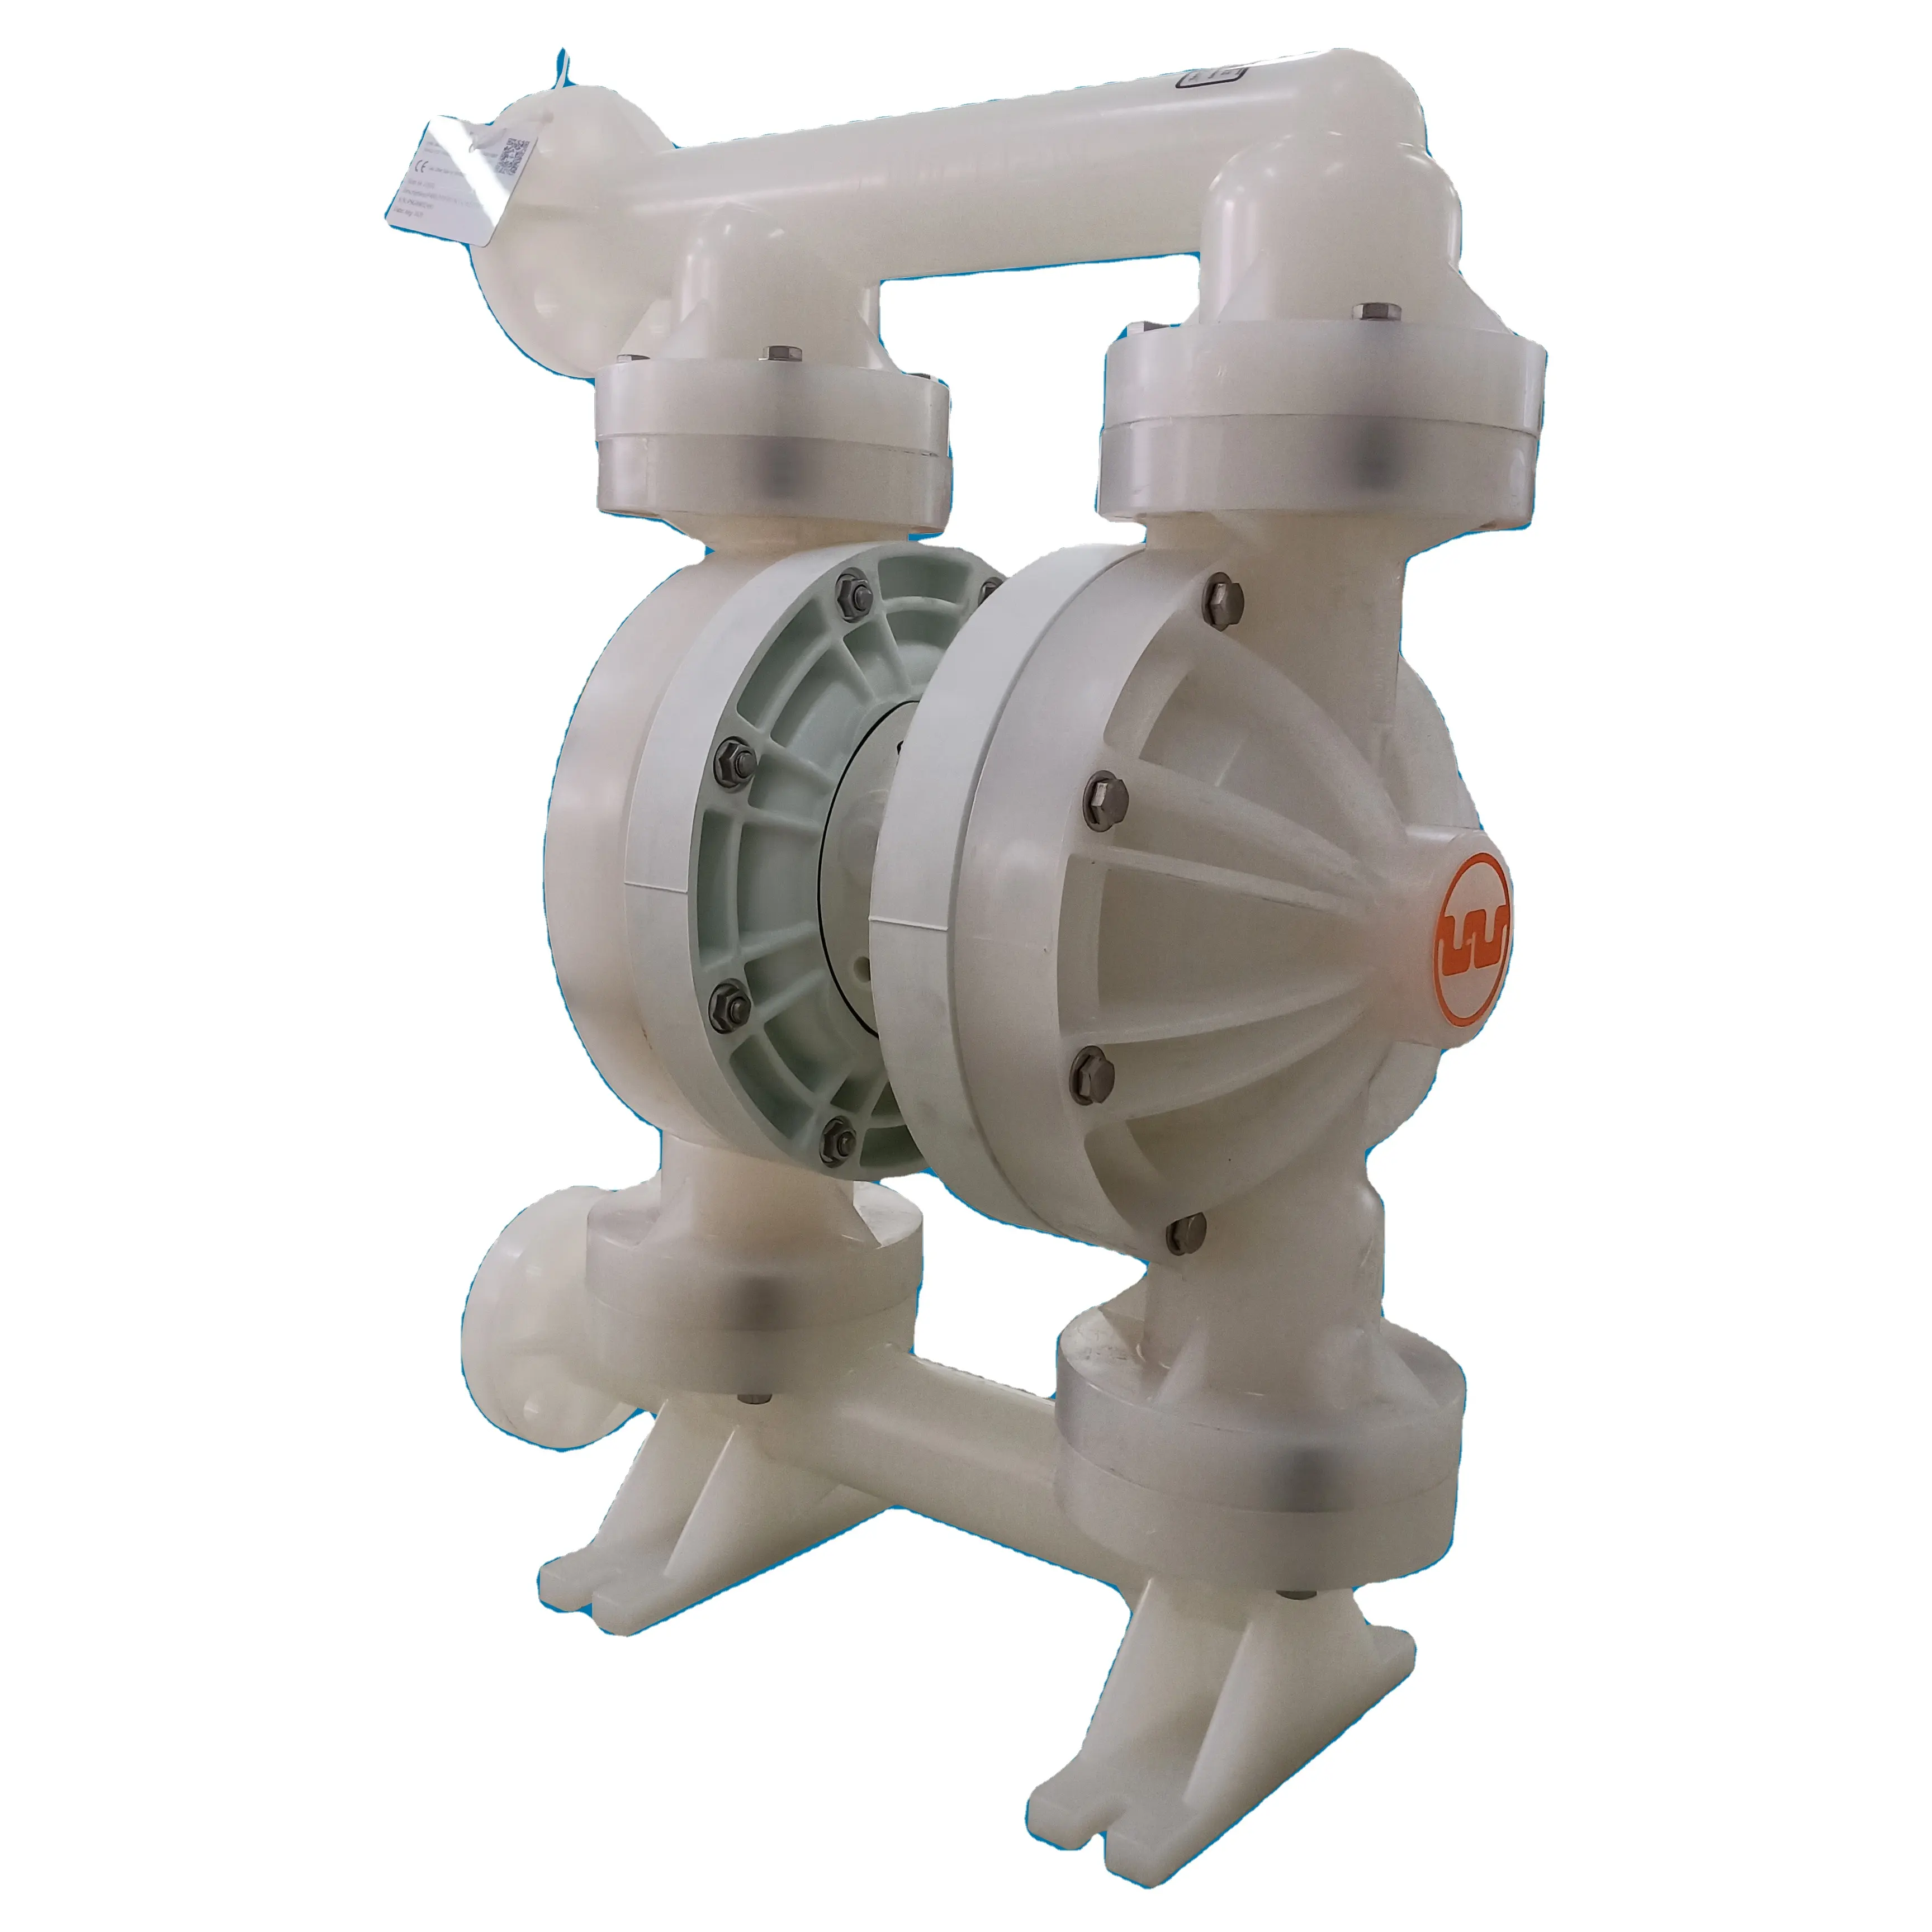 PP 1-1/2" Air Operated Diaphragm Pump P400/PPPPP/NES/NE/PBN with PP shell and Neoprene diaphragm